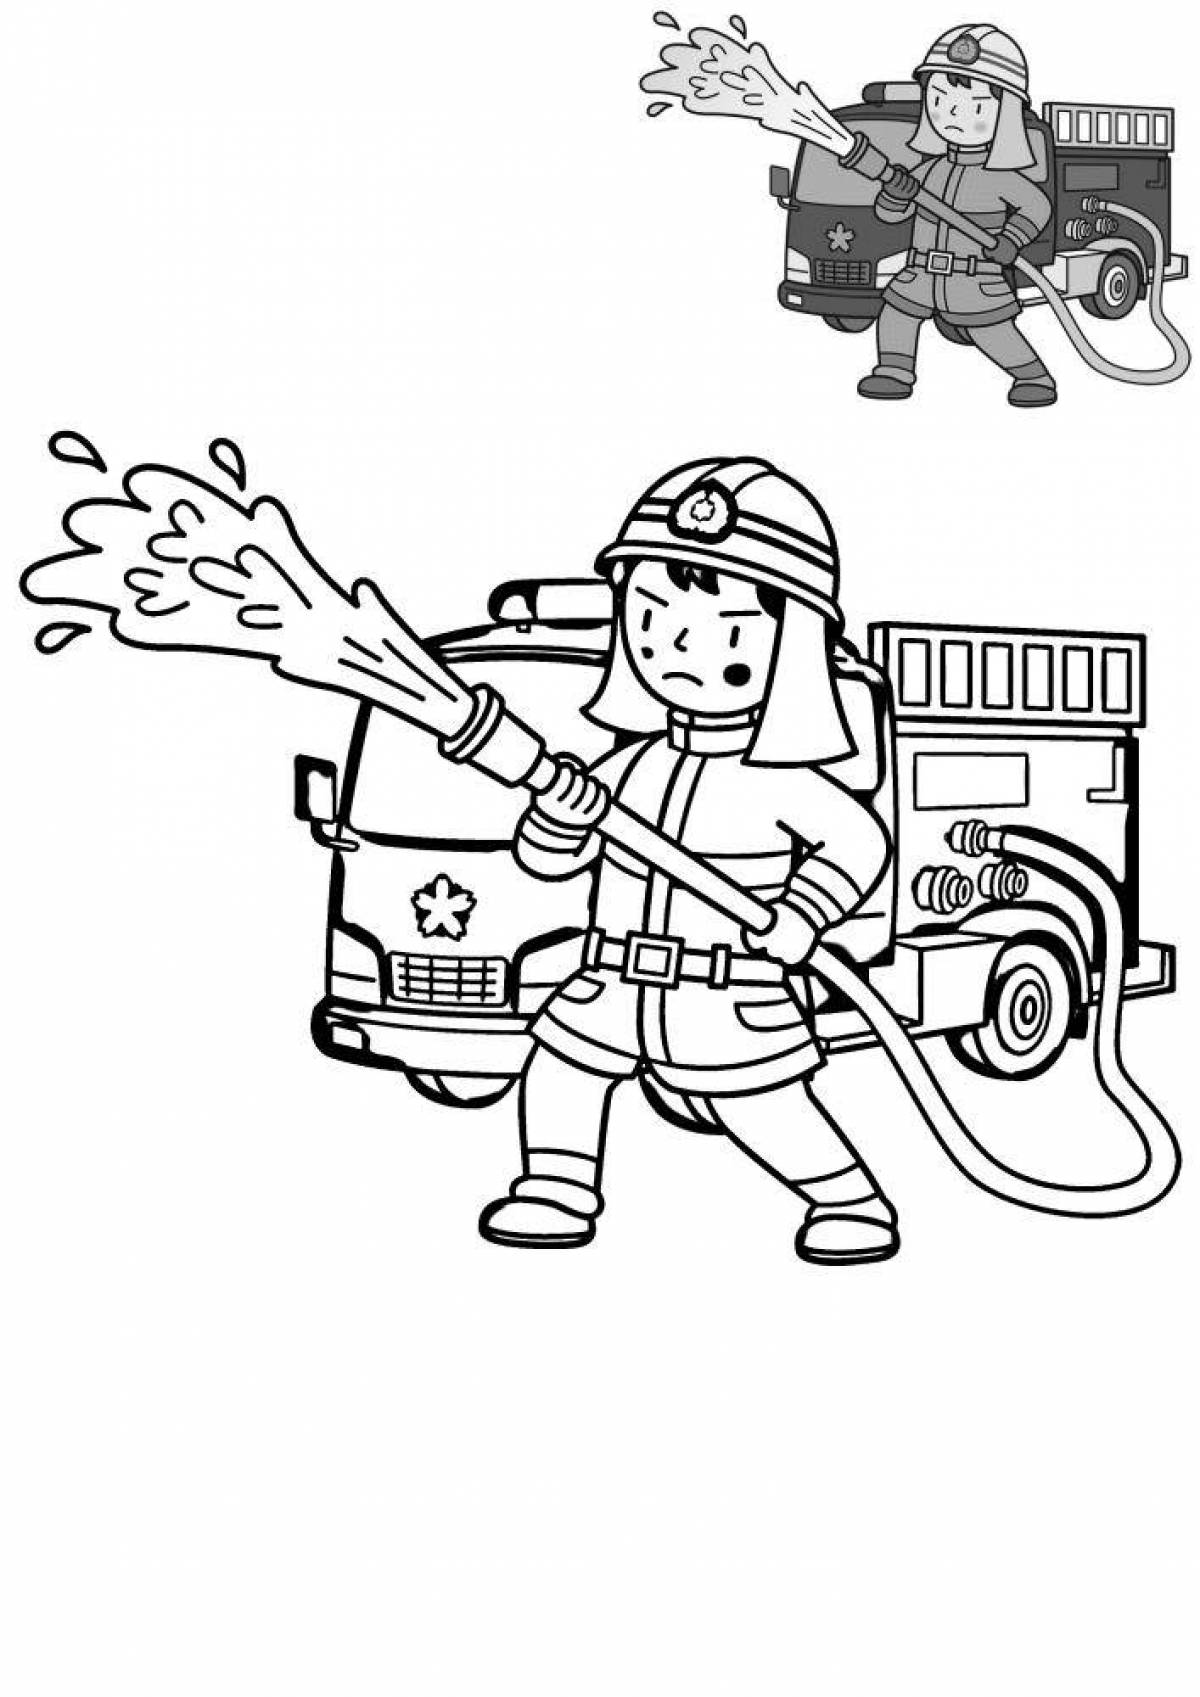 Coloring book shining firefighter